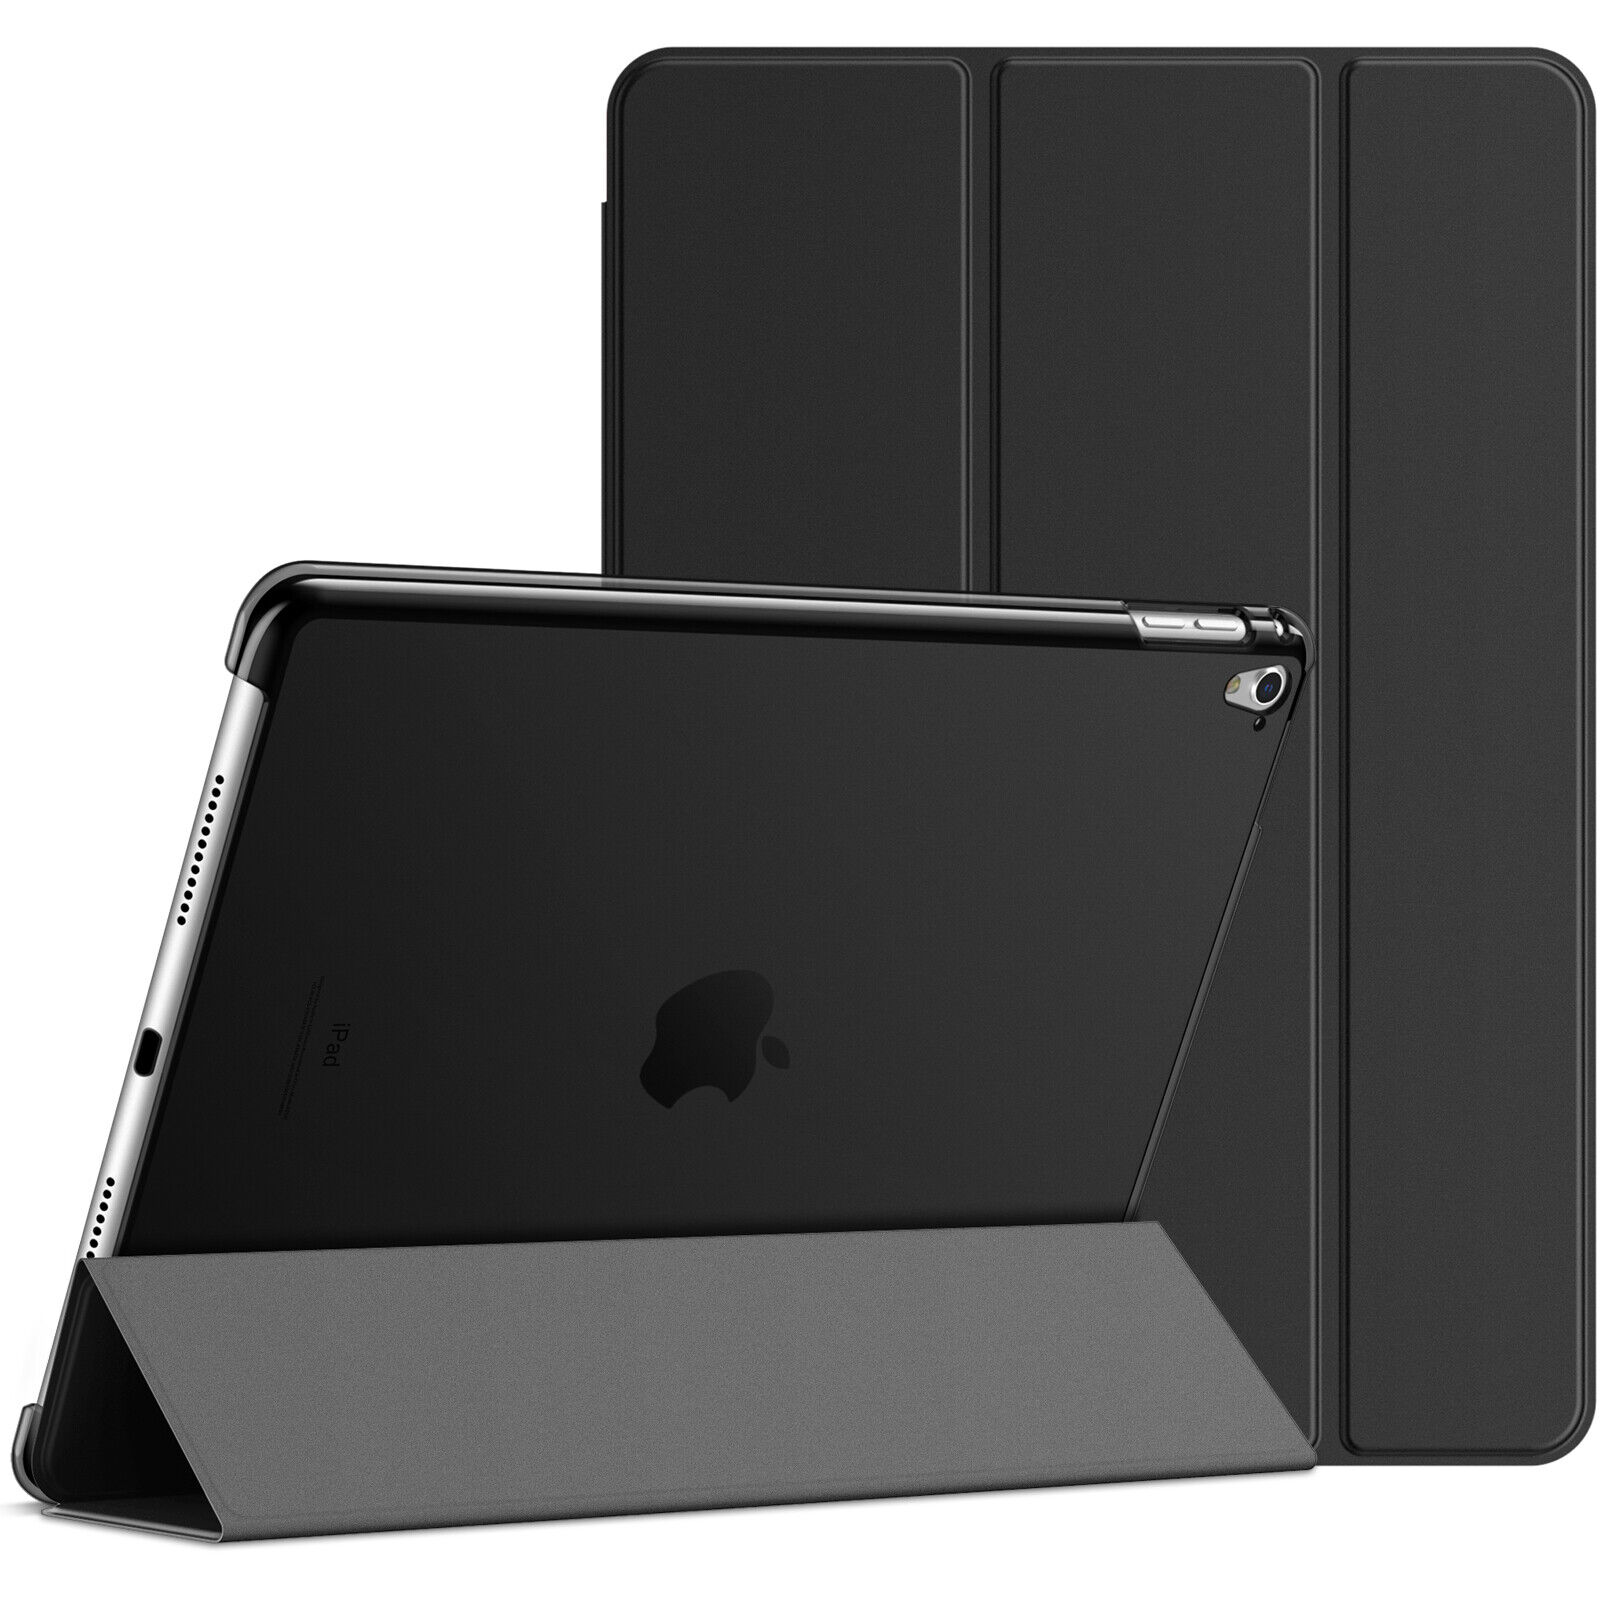 JETech Case for Apple iPad Pro 9.7-Inch 2016 Smart Cover with Auto Sleep/Wake